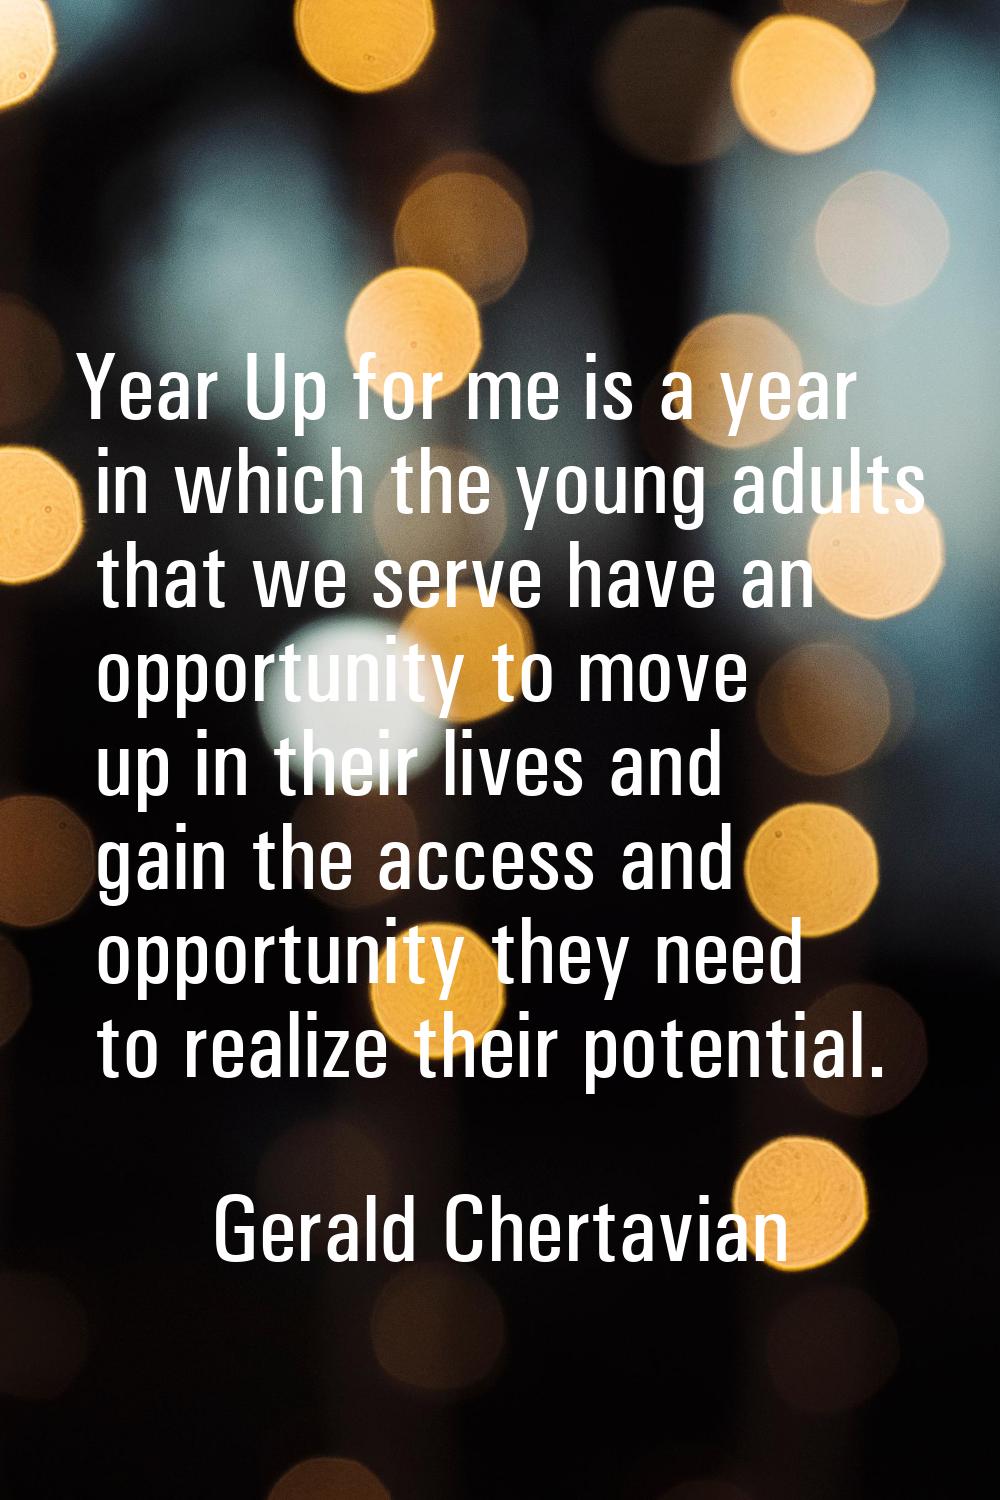 Year Up for me is a year in which the young adults that we serve have an opportunity to move up in 